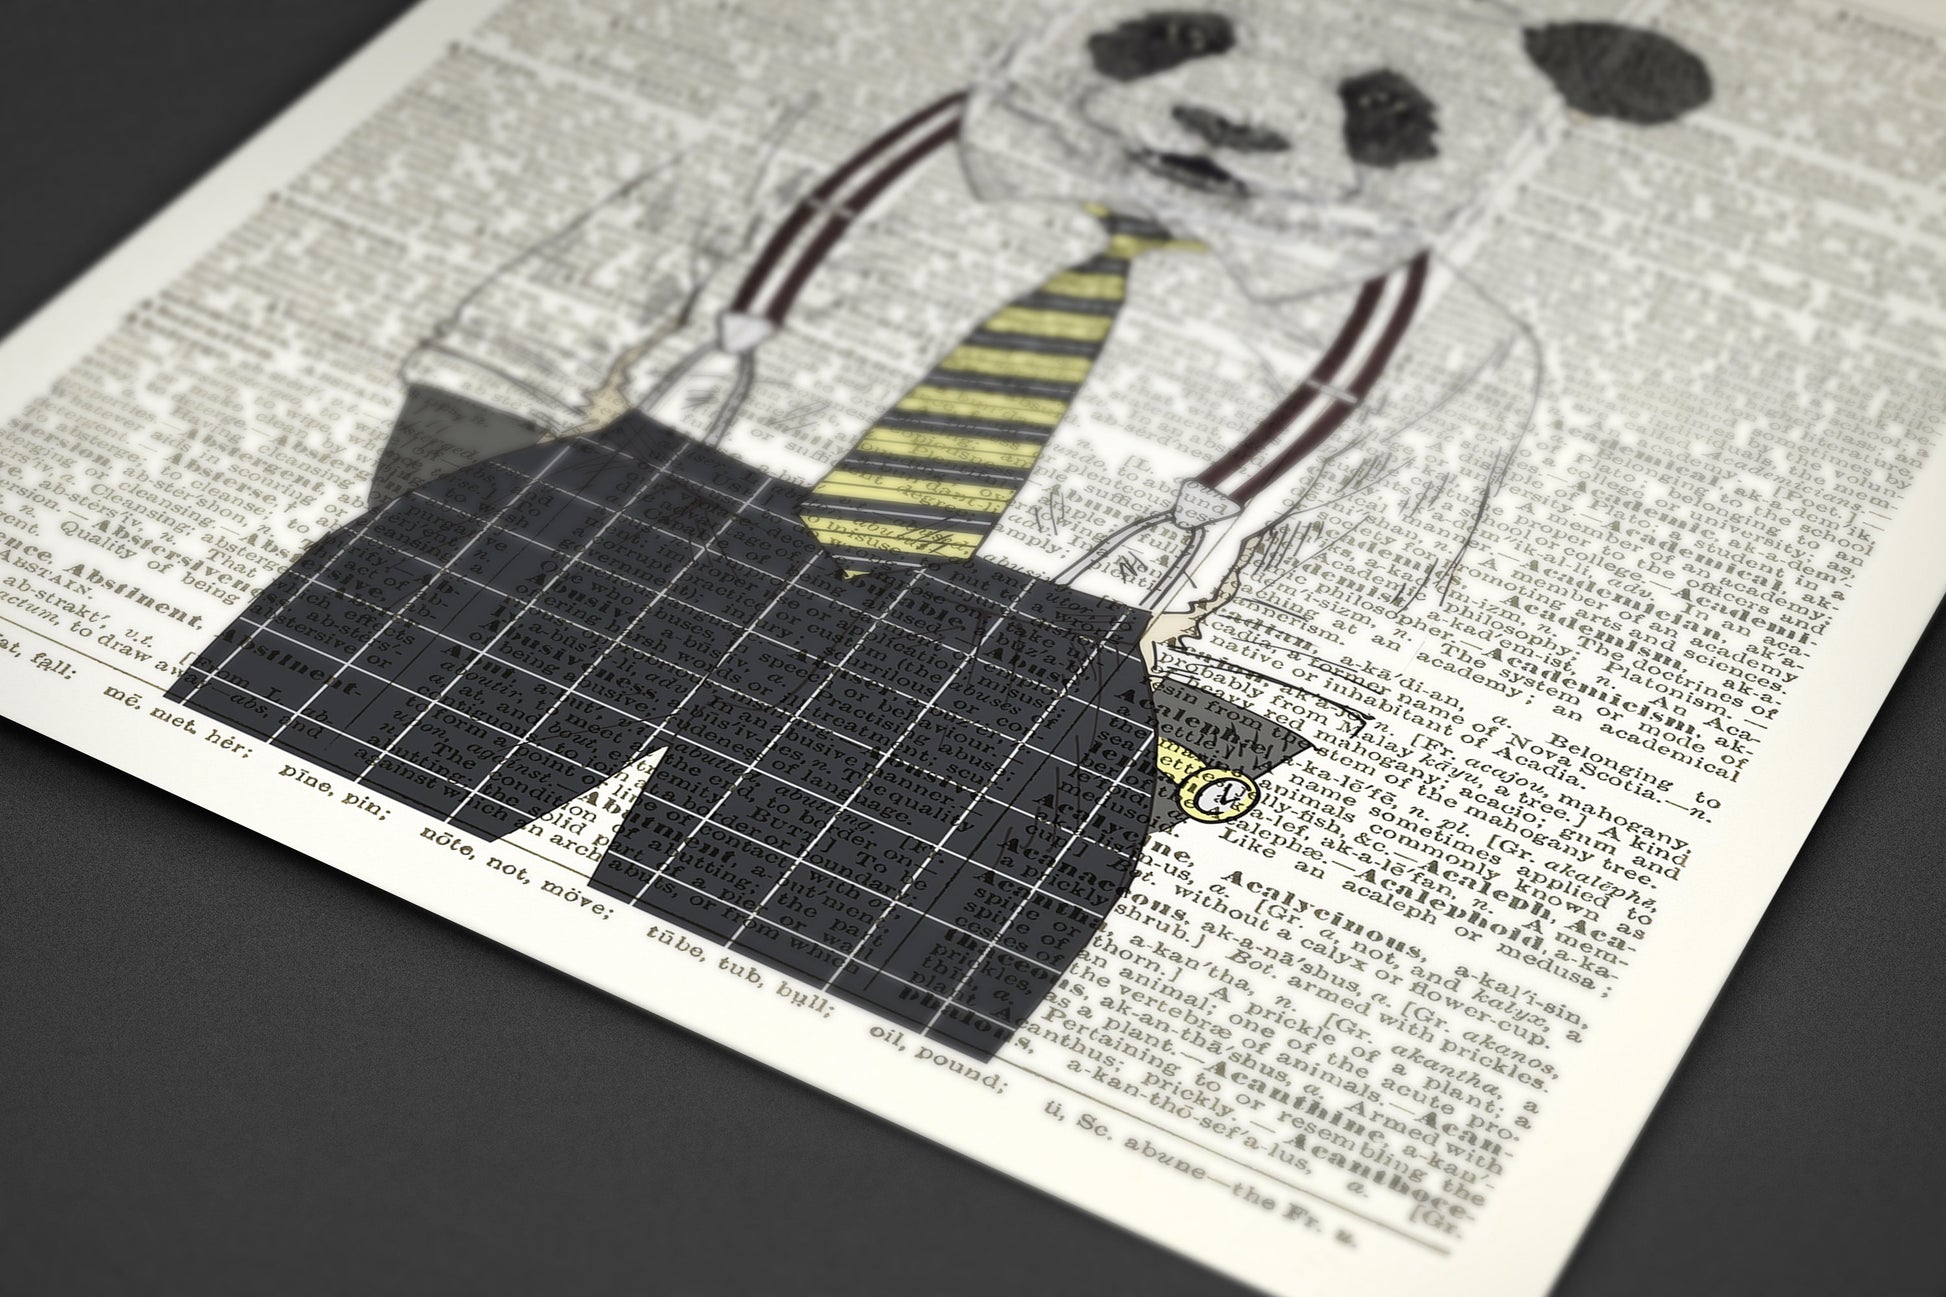 Dictionary Print \  #72 Gangster Panda \ Dictionary Art / Dictionary Page | Nursery Art | Vintage Poster | Gift for her | Gift for Mum